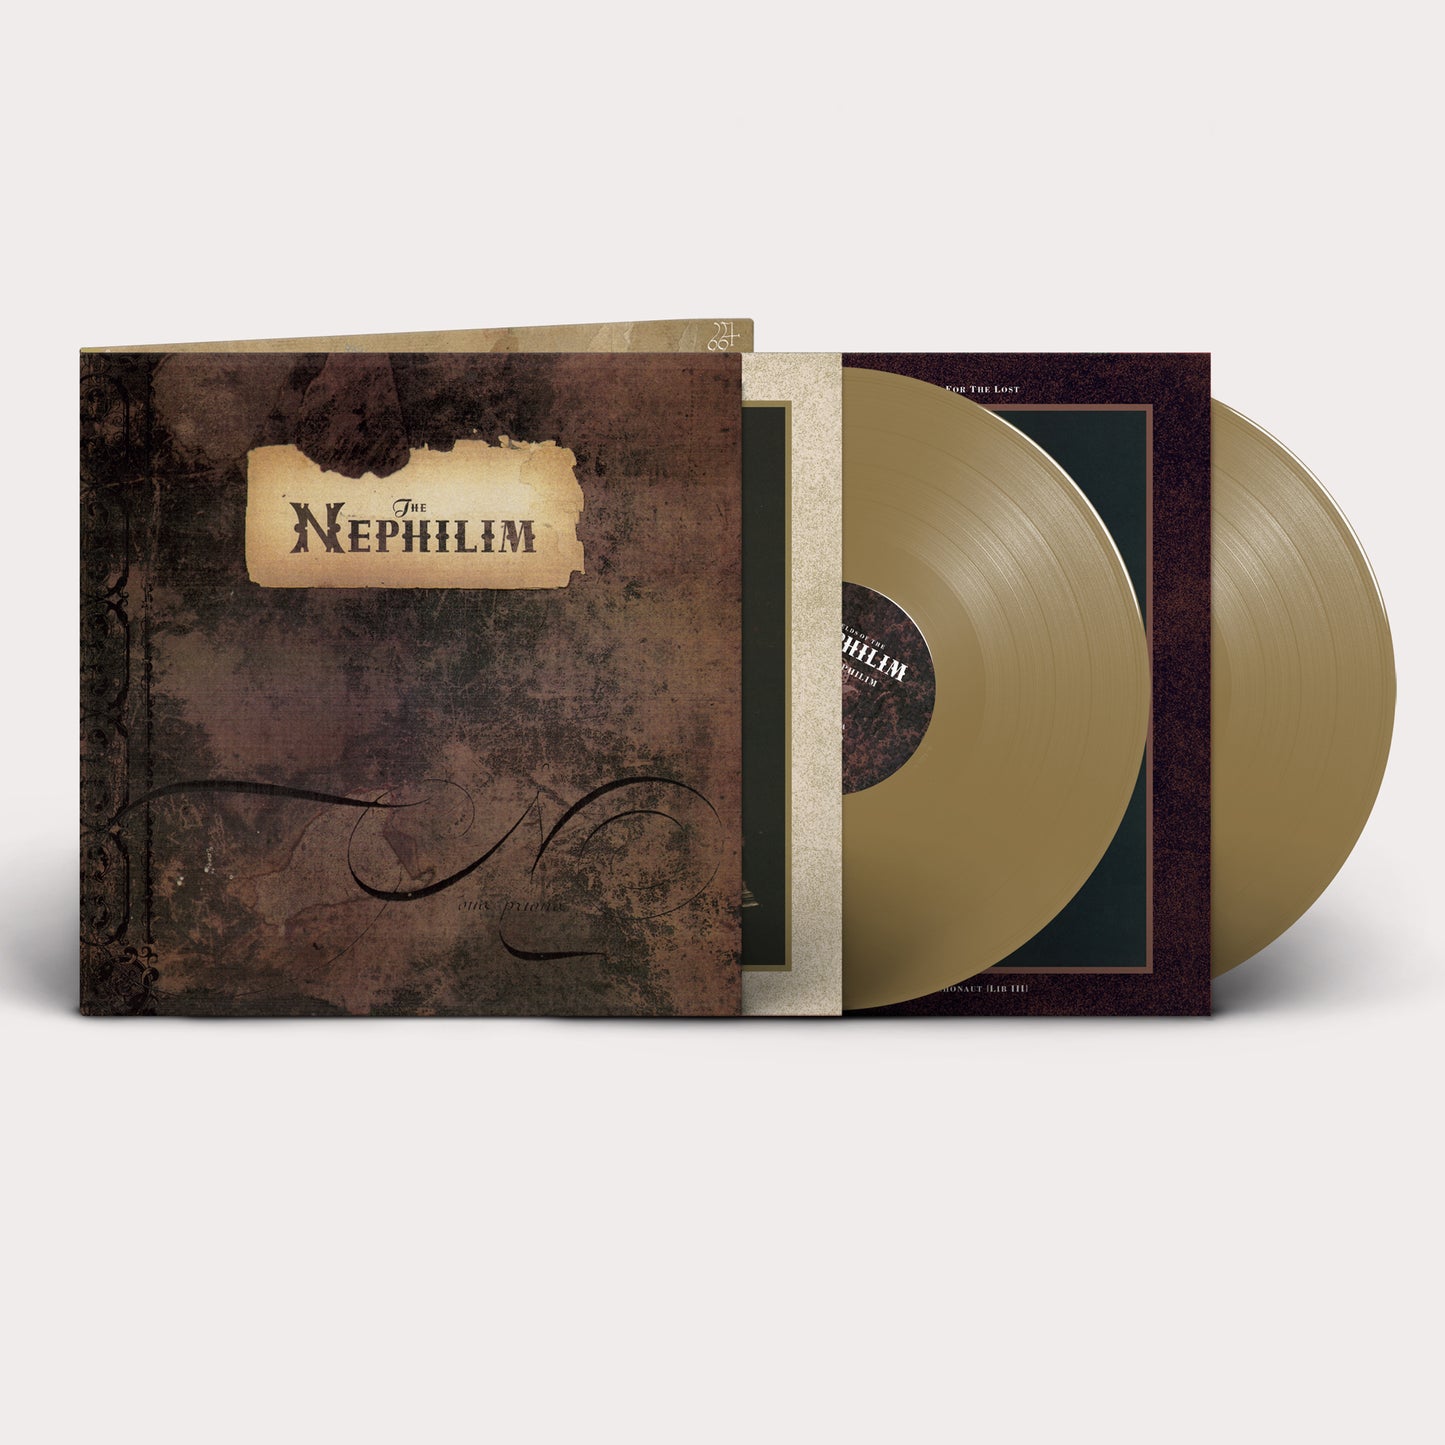 2LP - Fields Of The Nephilim - The Nephilim